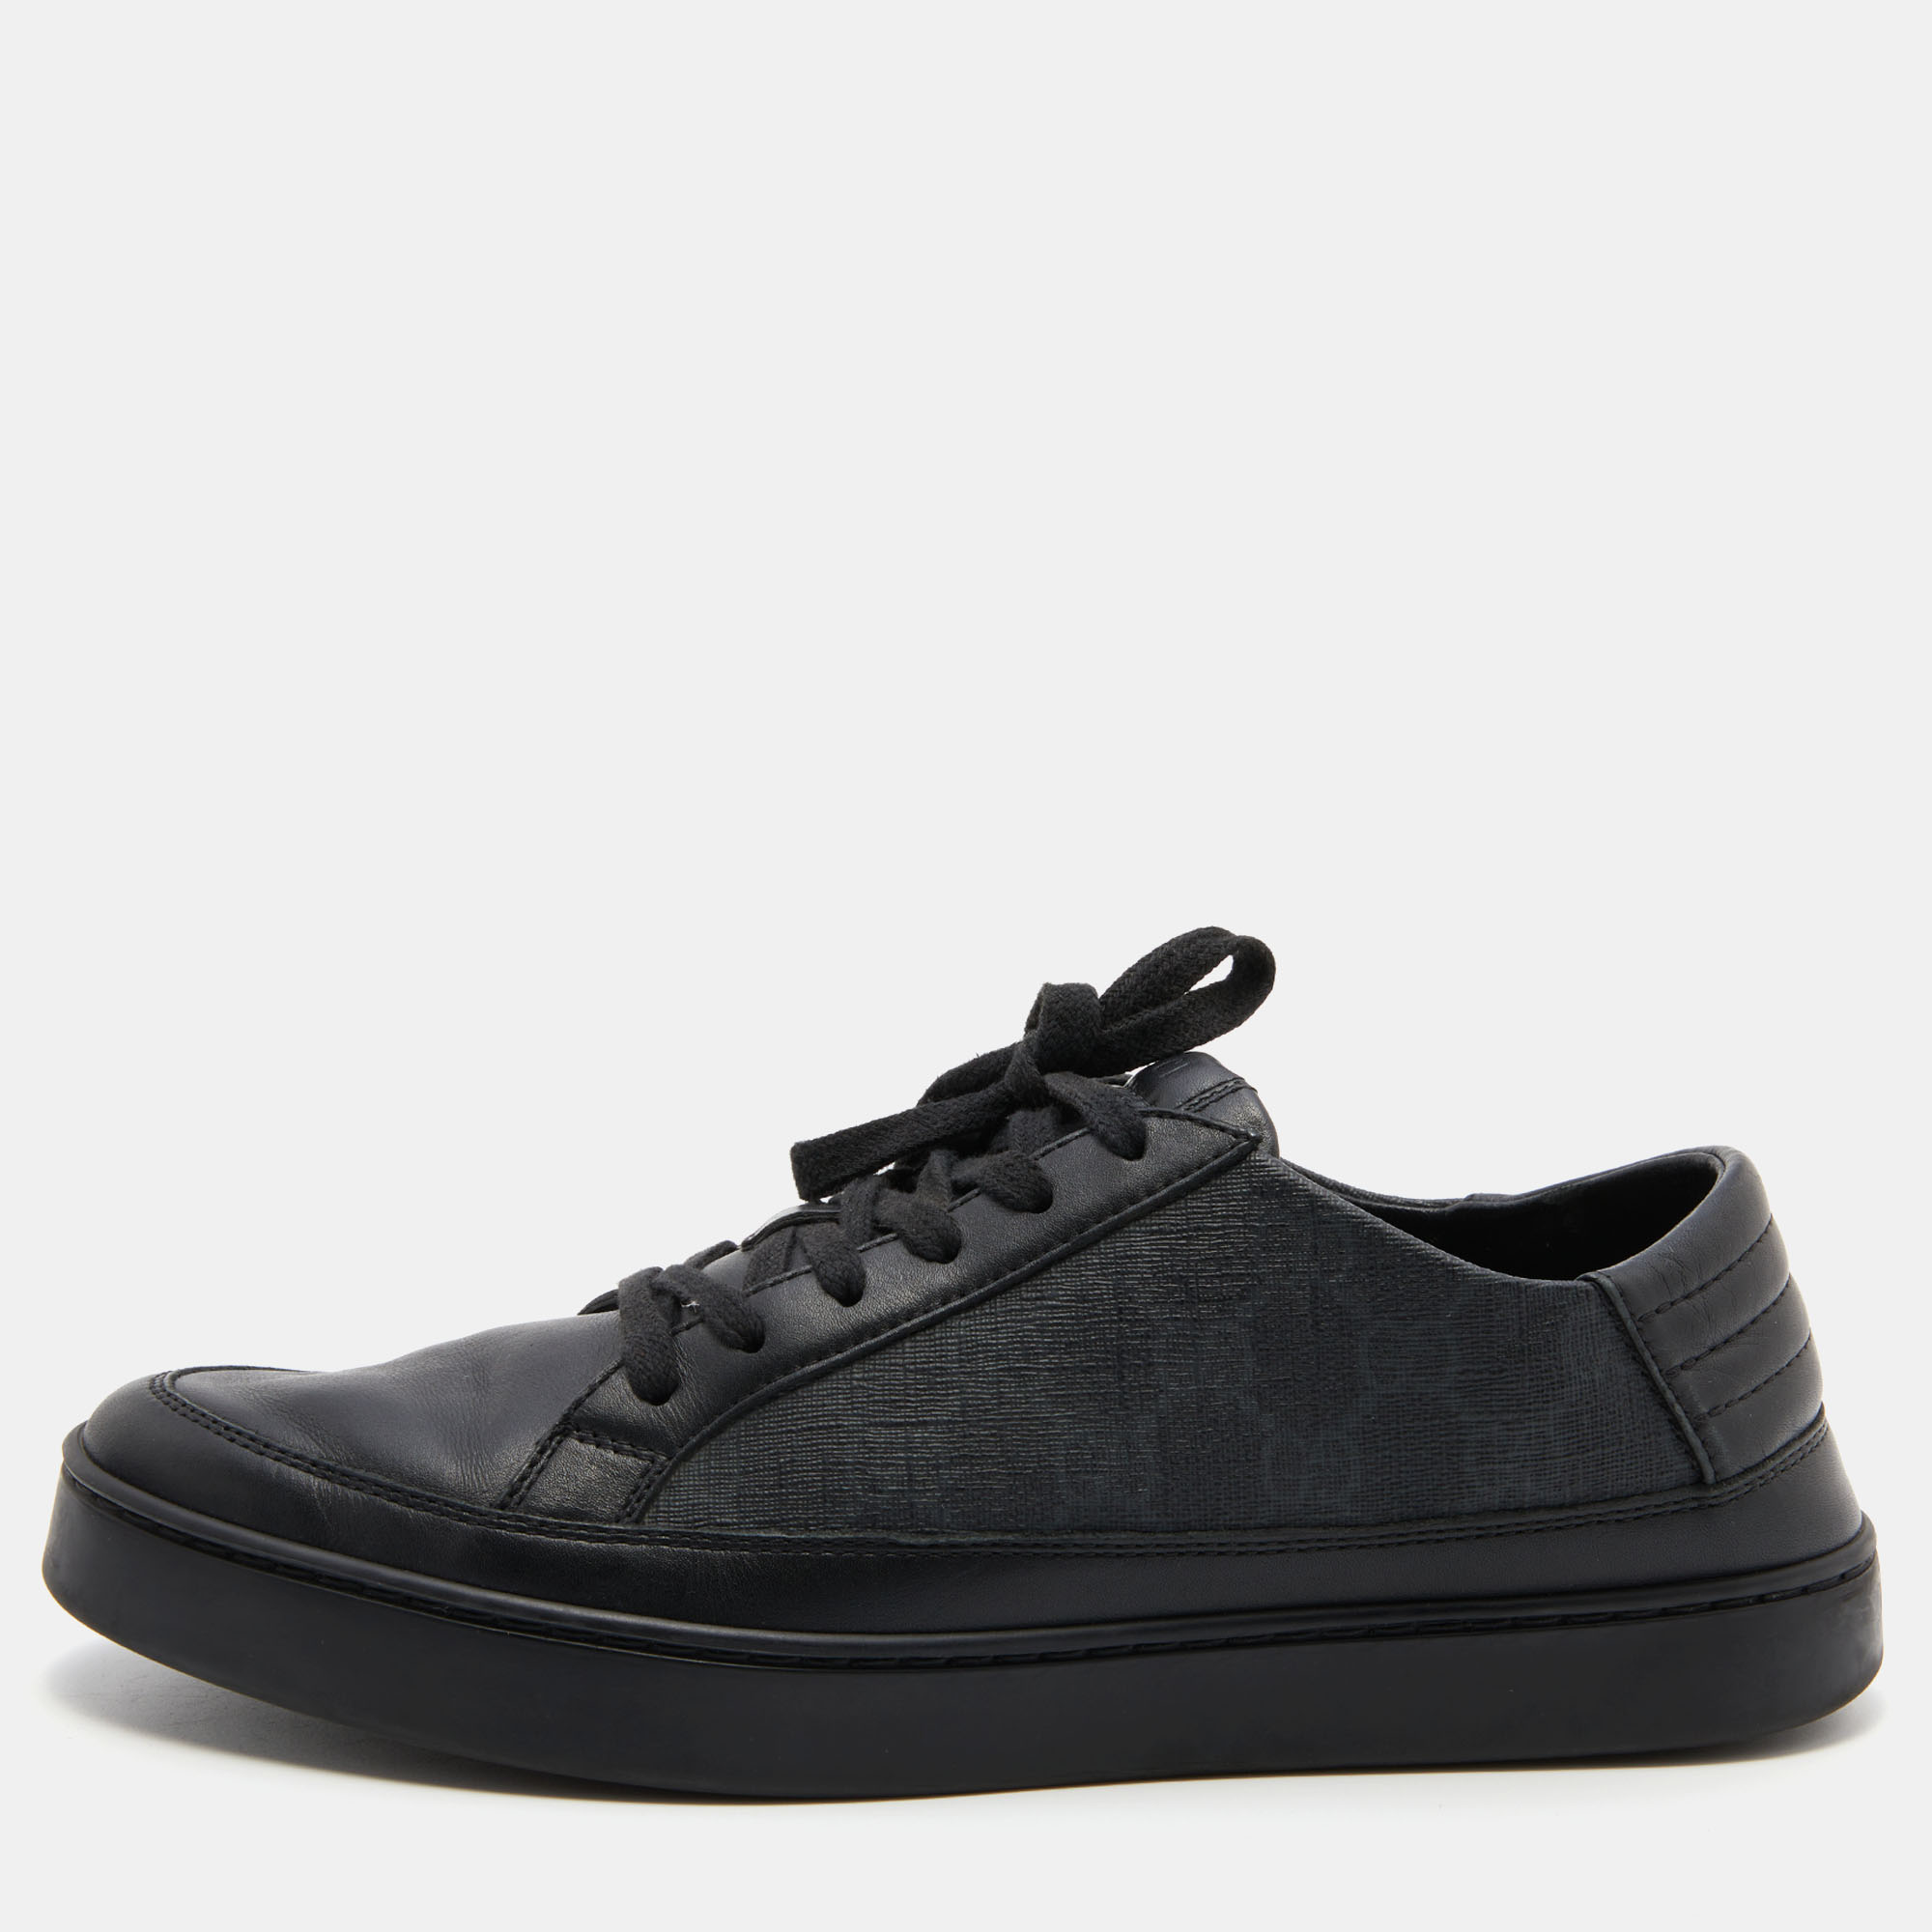 Gucci Black GG Supreme Canvas And Leather Low Top Sneakers Size 42